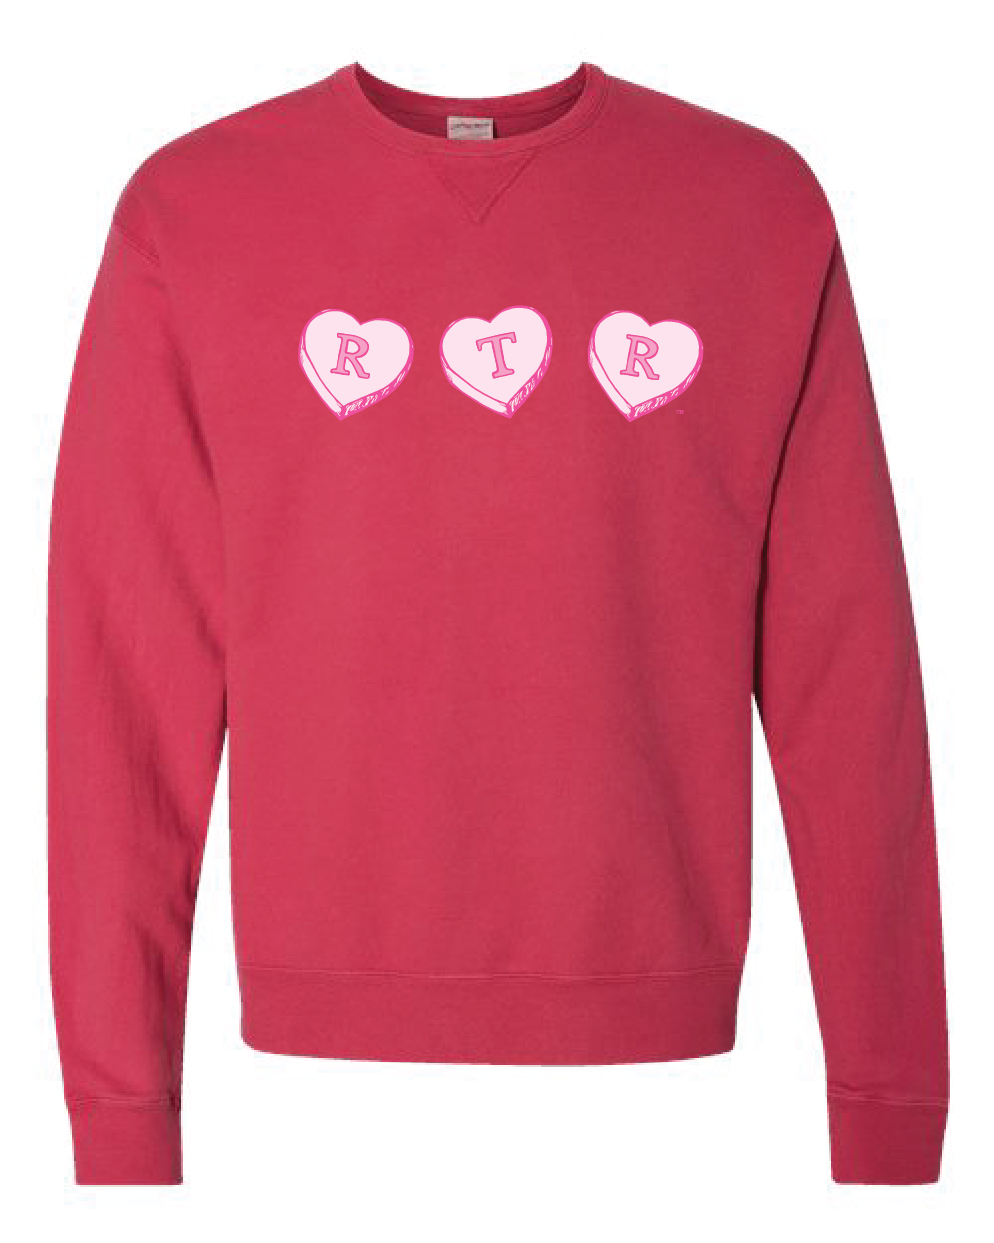 RTR candy hearts top